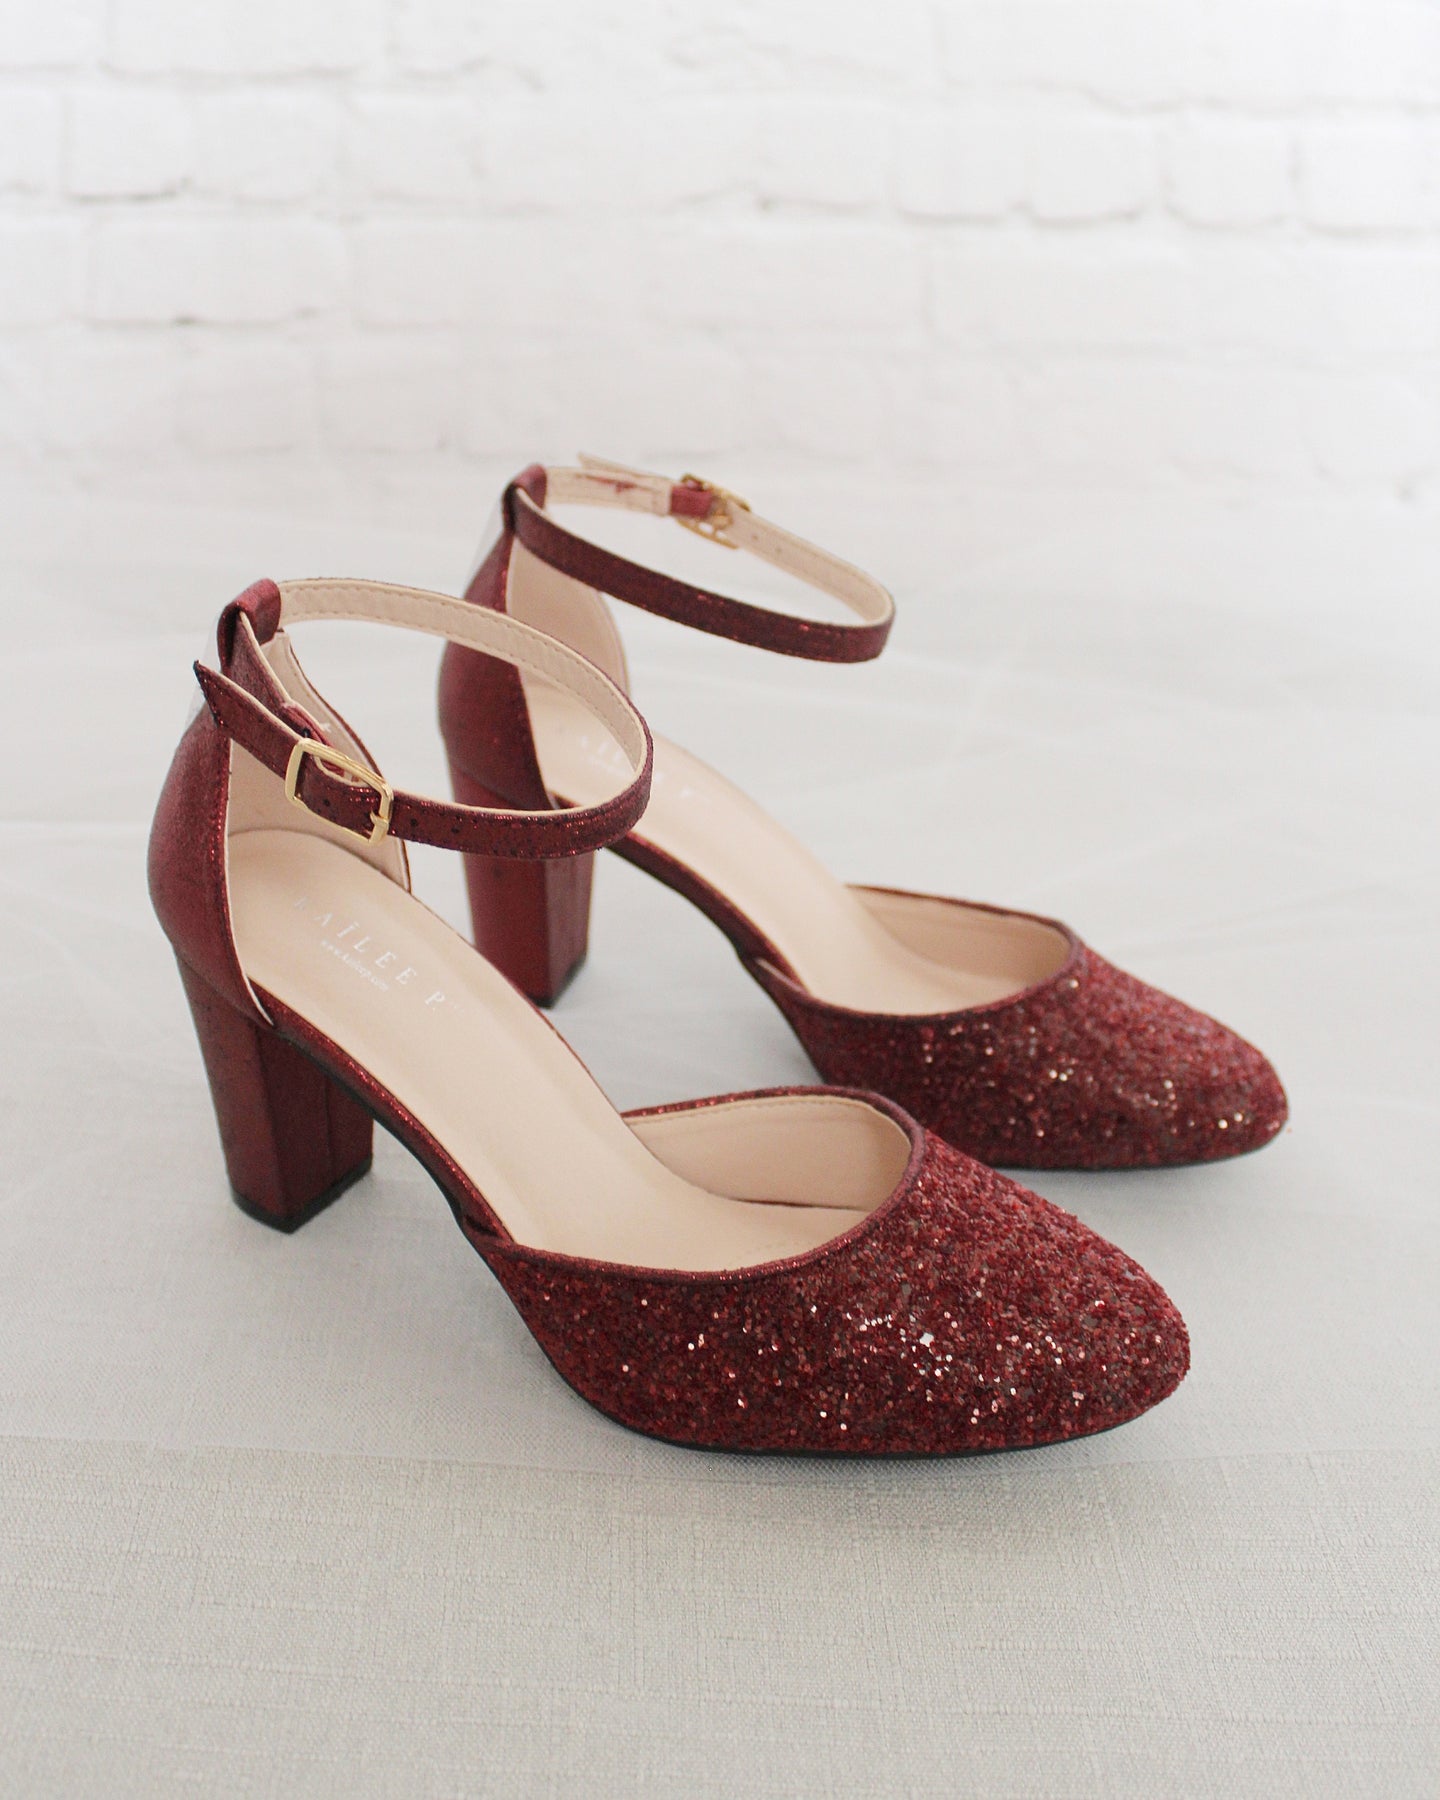 Burgundy Rock Glitter Block Heel with Back Satin Bow - Women Shoes, Wedding  Shoes, Bridesmaids Shoes